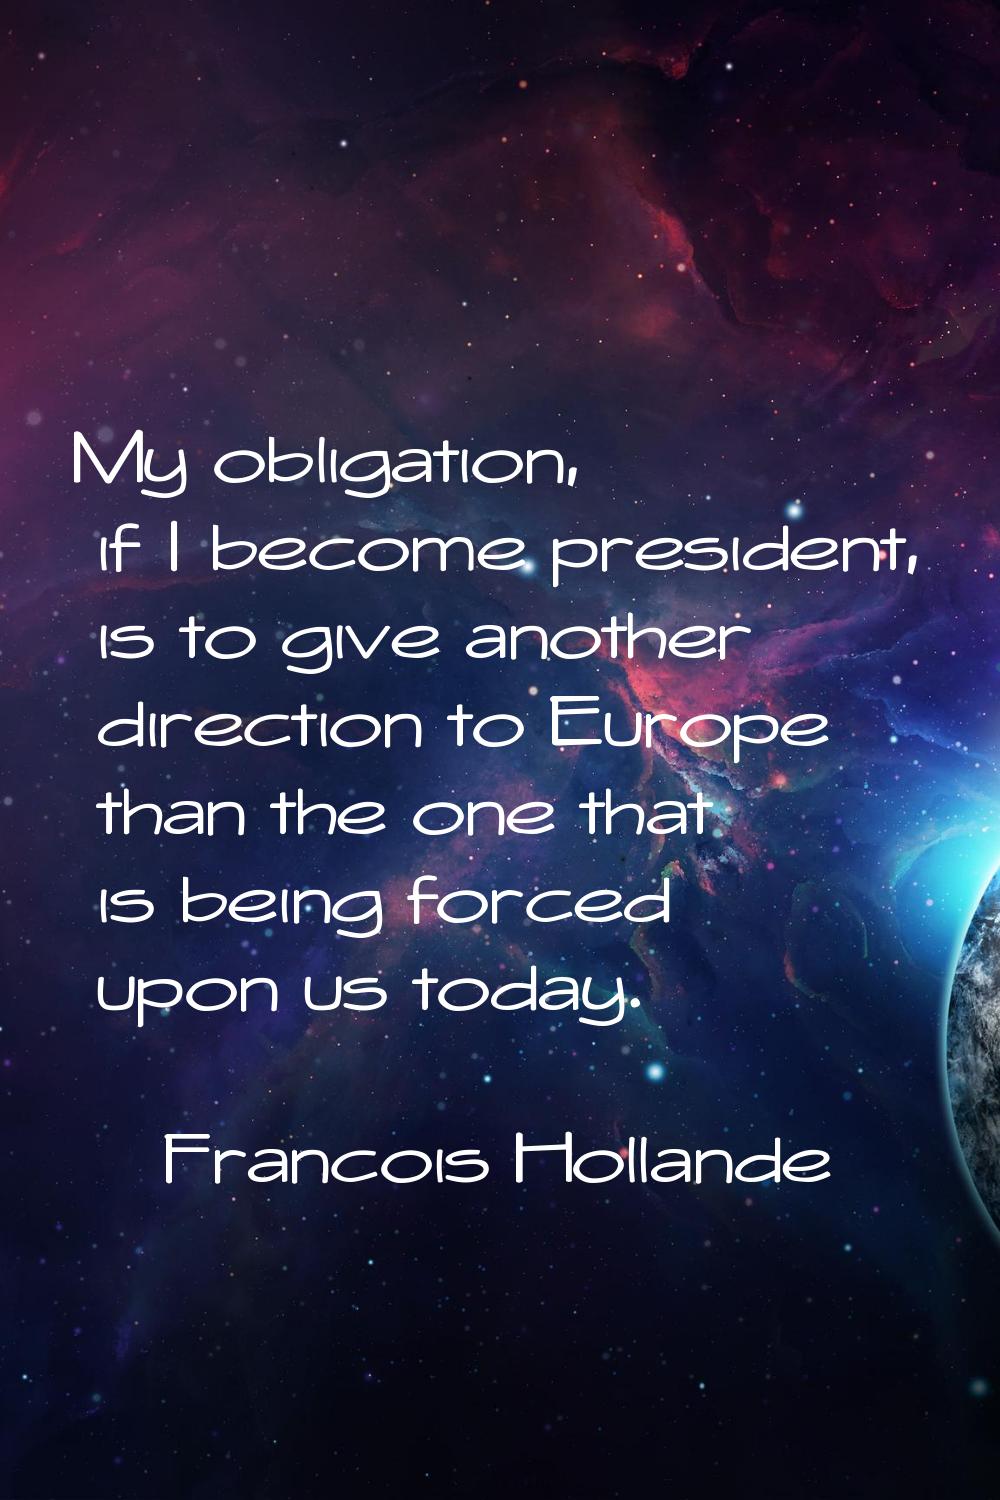 My obligation, if I become president, is to give another direction to Europe than the one that is b